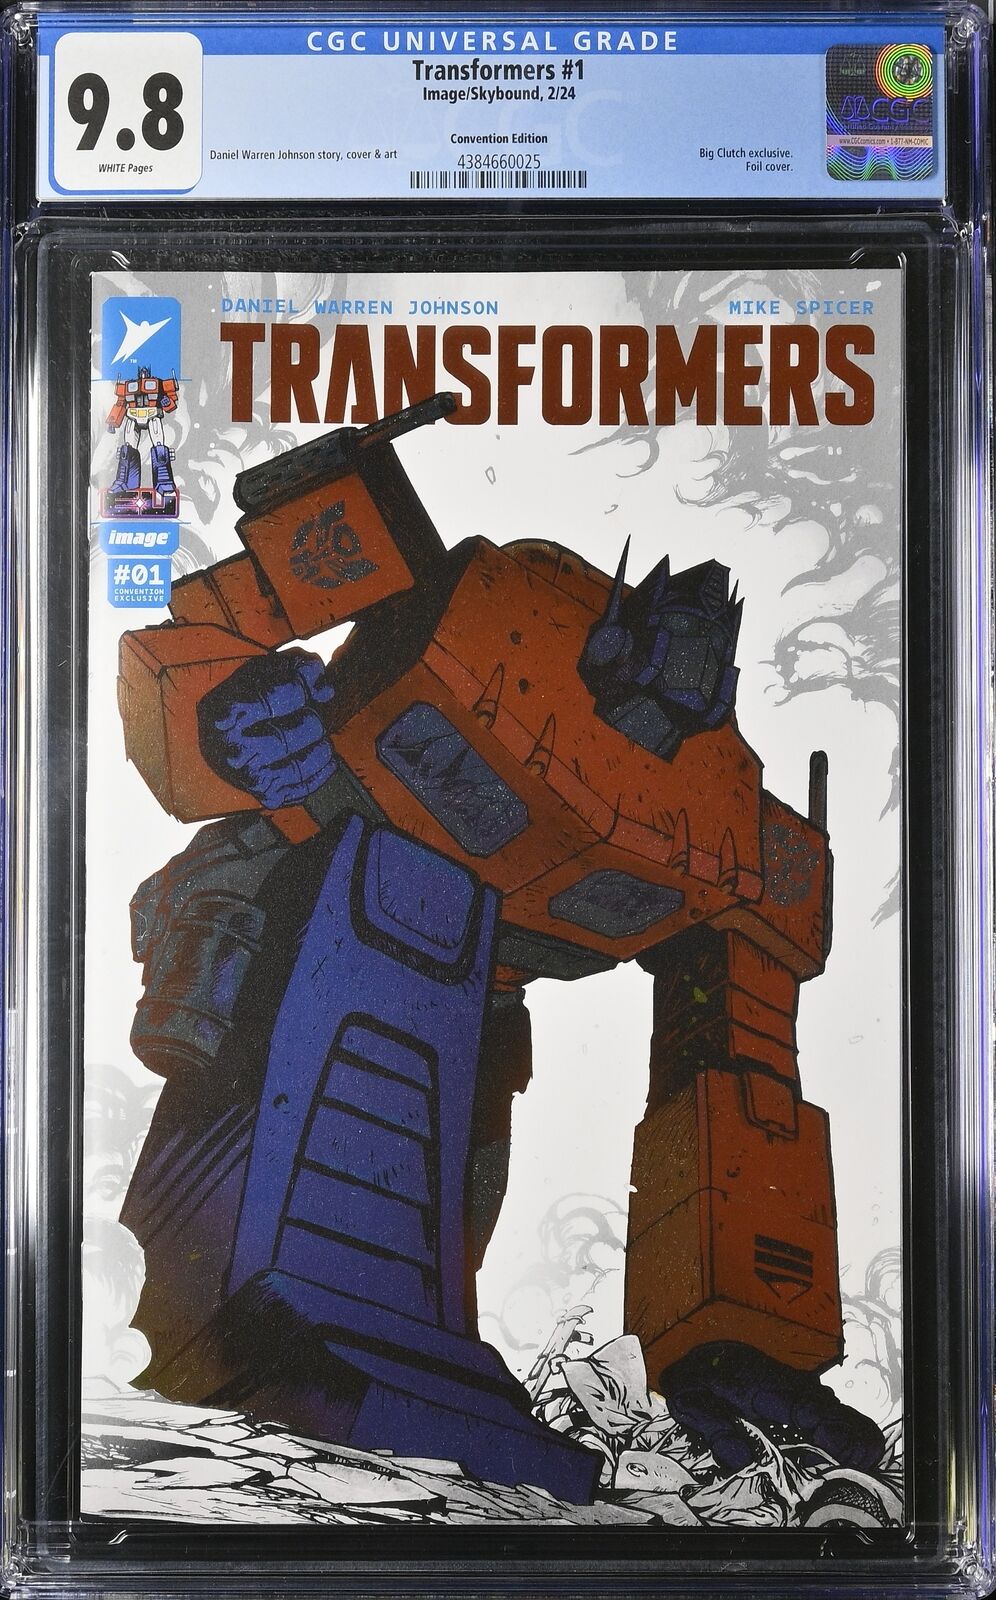 Transformers #1 CGC 9.8 Convention Edition Variant Spot Foil Image Skybound DWJ